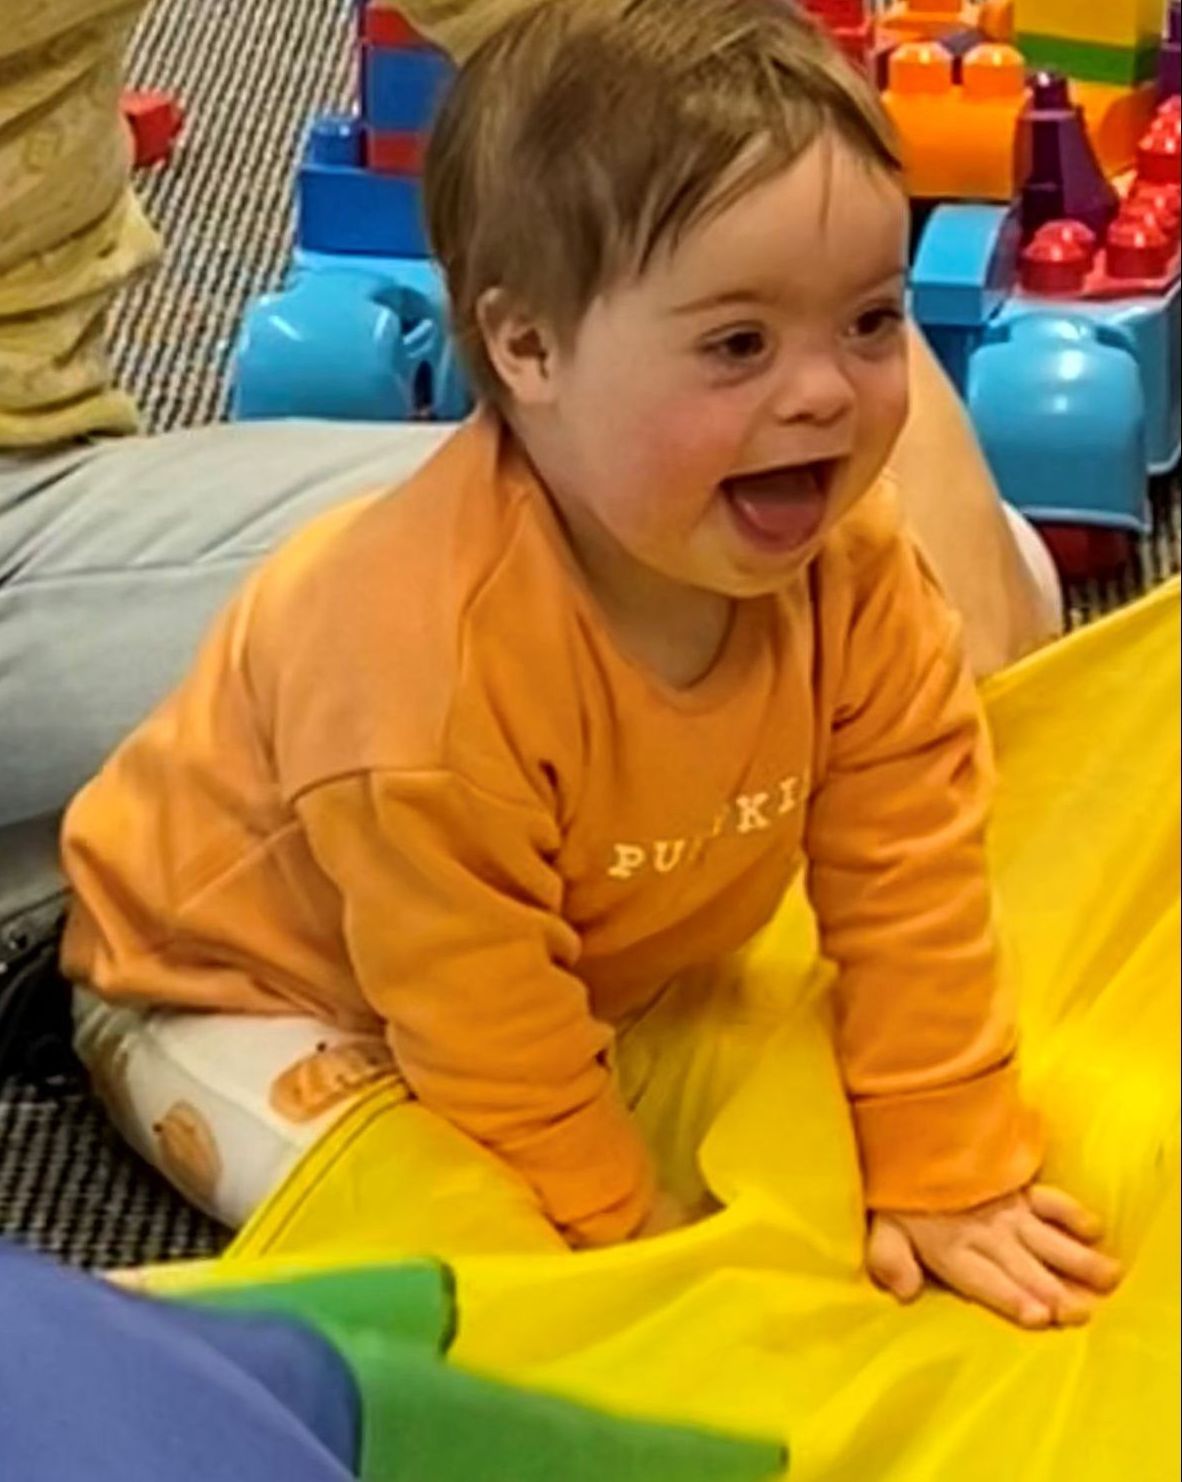 a baby wearing an orange shirt that says pumpkin is crawling on a yellow blanket